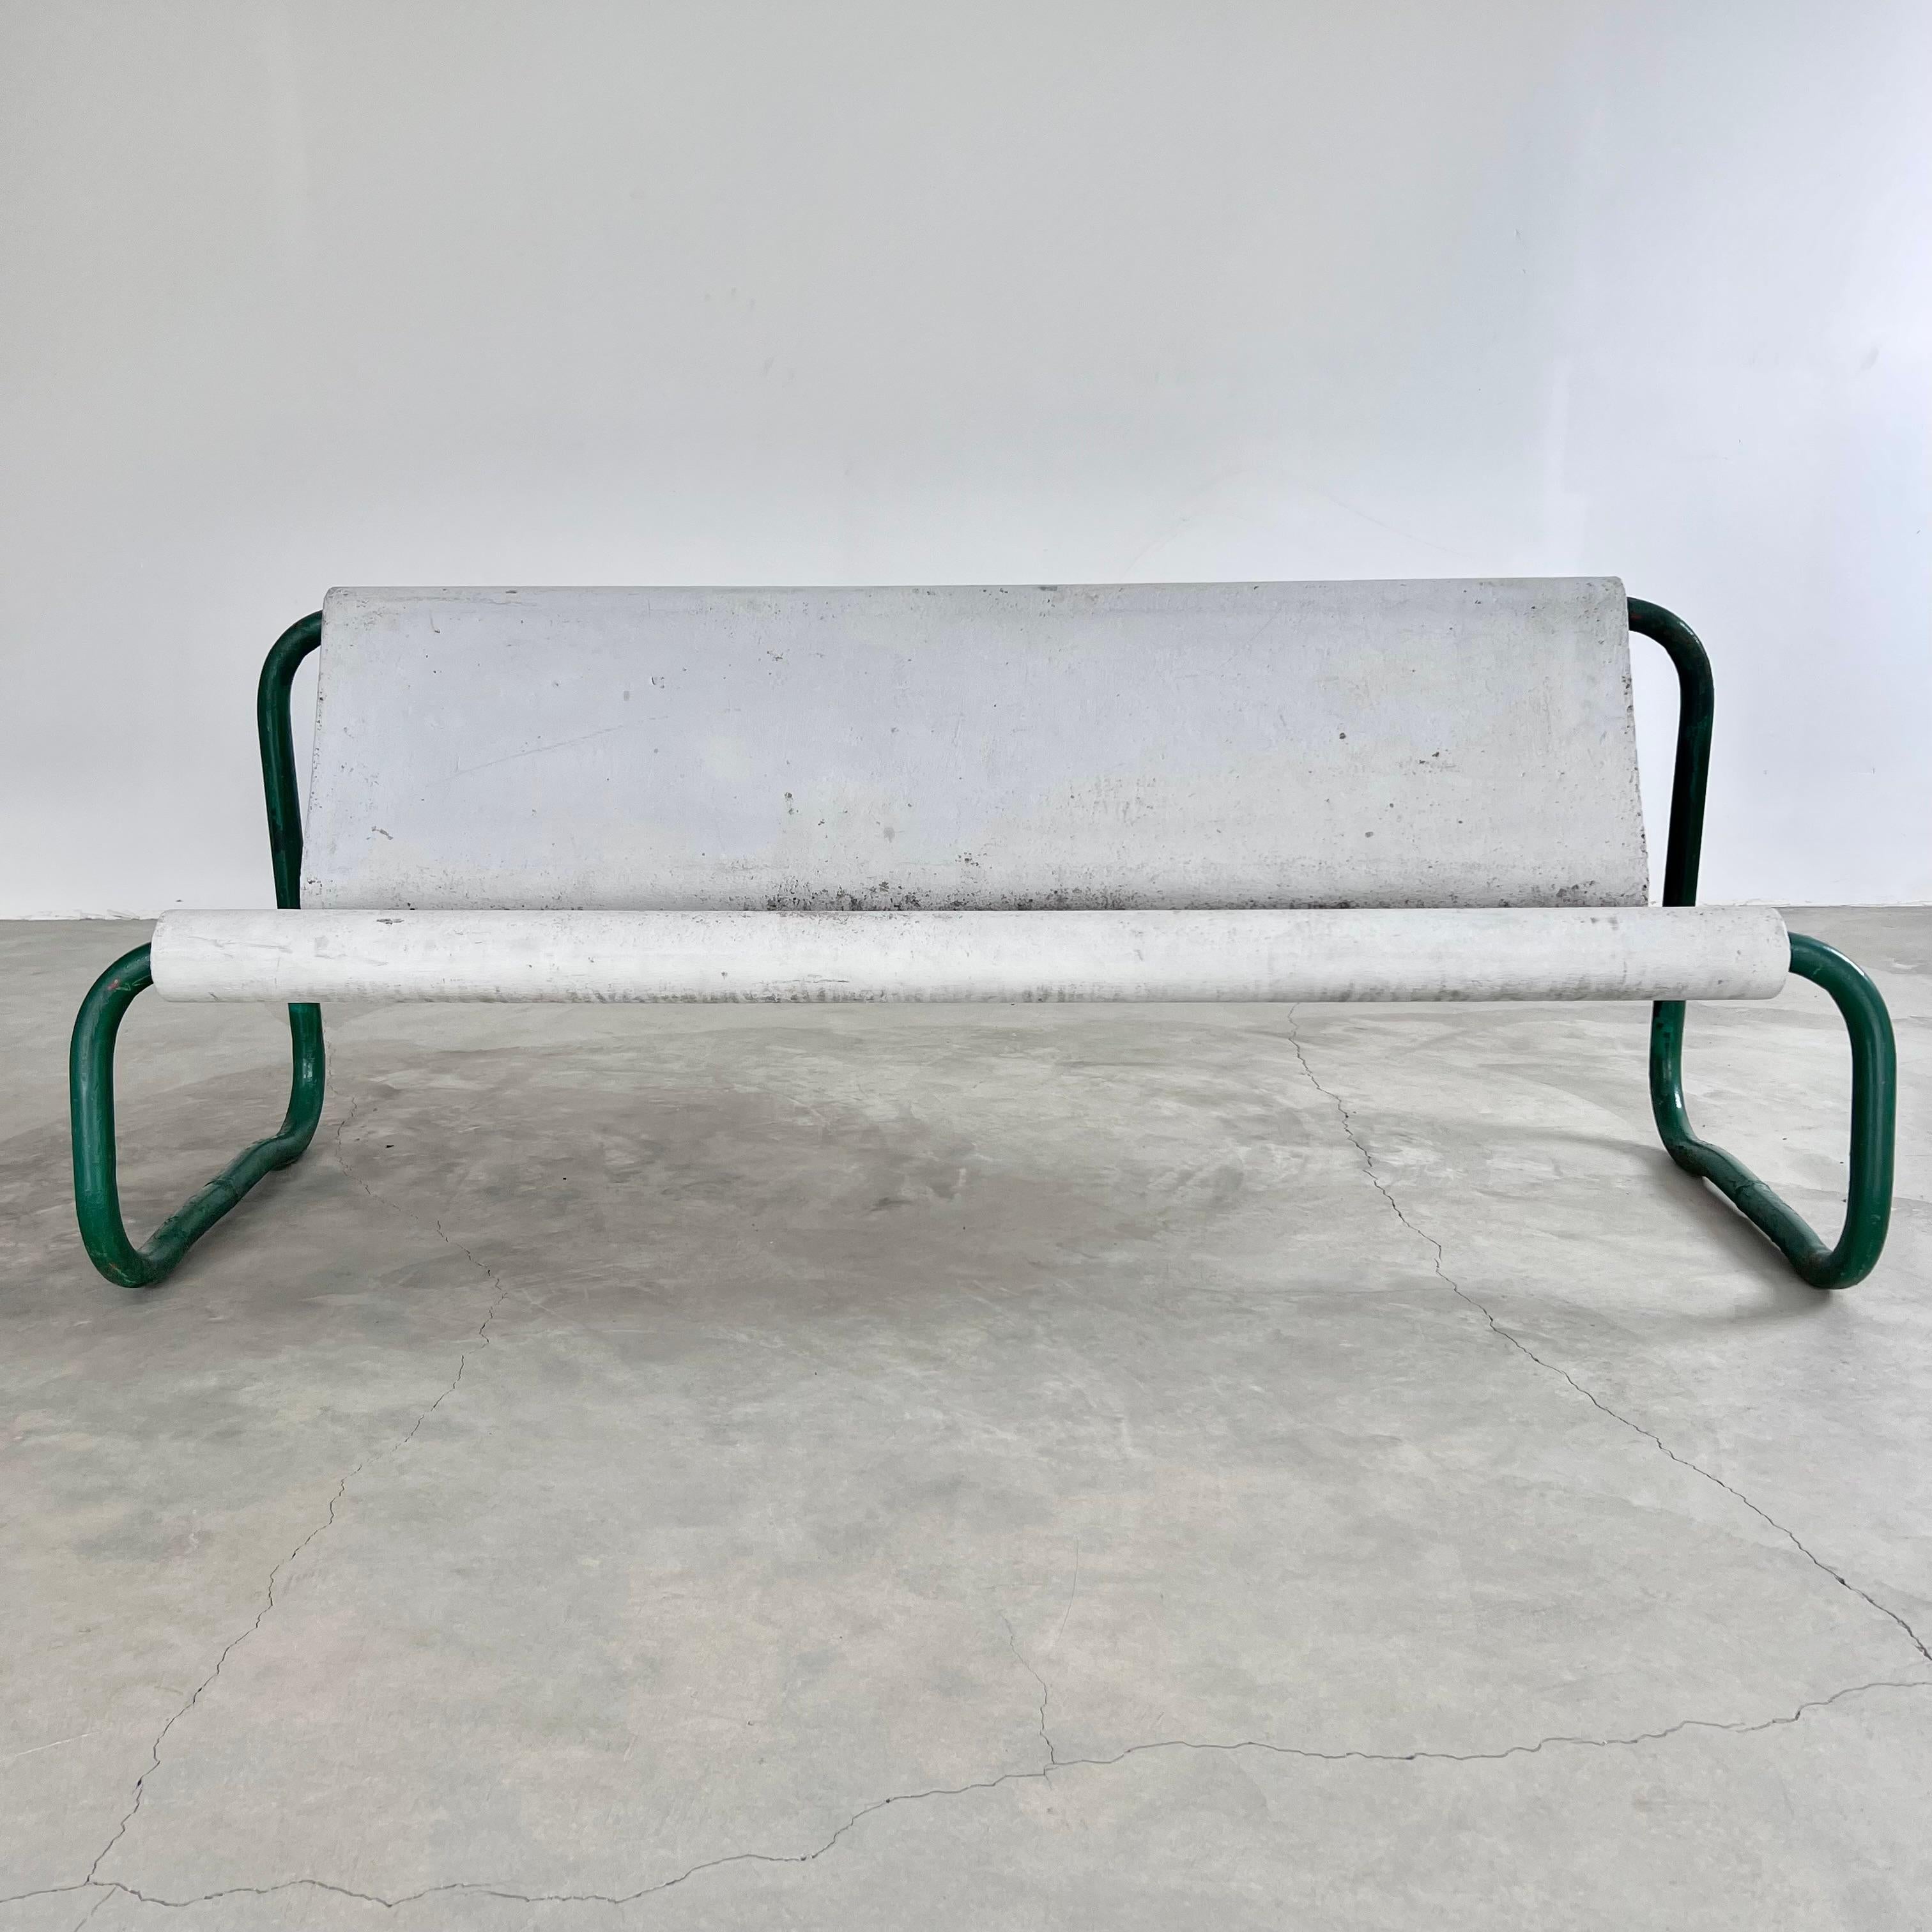 Remarkable mid-century floating concrete bench by Swiss Architect Willy Guhl. Circa 1960s. Sturdy and substantial. Holds the weight of 3 adults easily. Perfect minimal design as is common with the Swiss designer. The seat is made of fiber cement